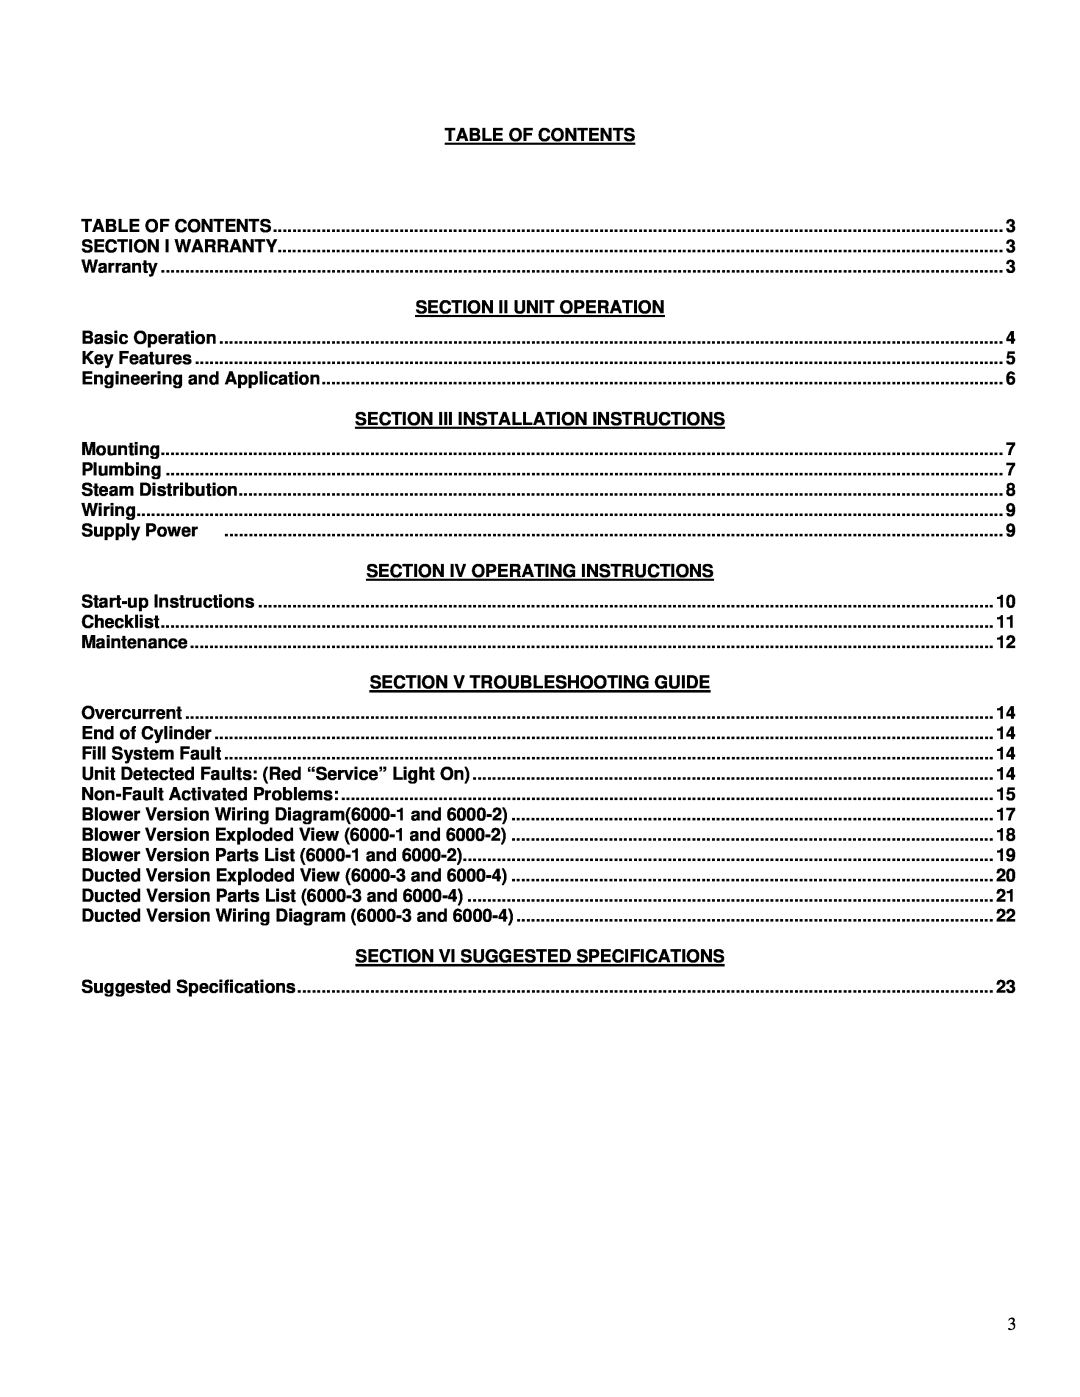 Herrmidifier Co 6000 owner manual Table Of Contents, Section Ii Unit Operation, Section Iii Installation Instructions 